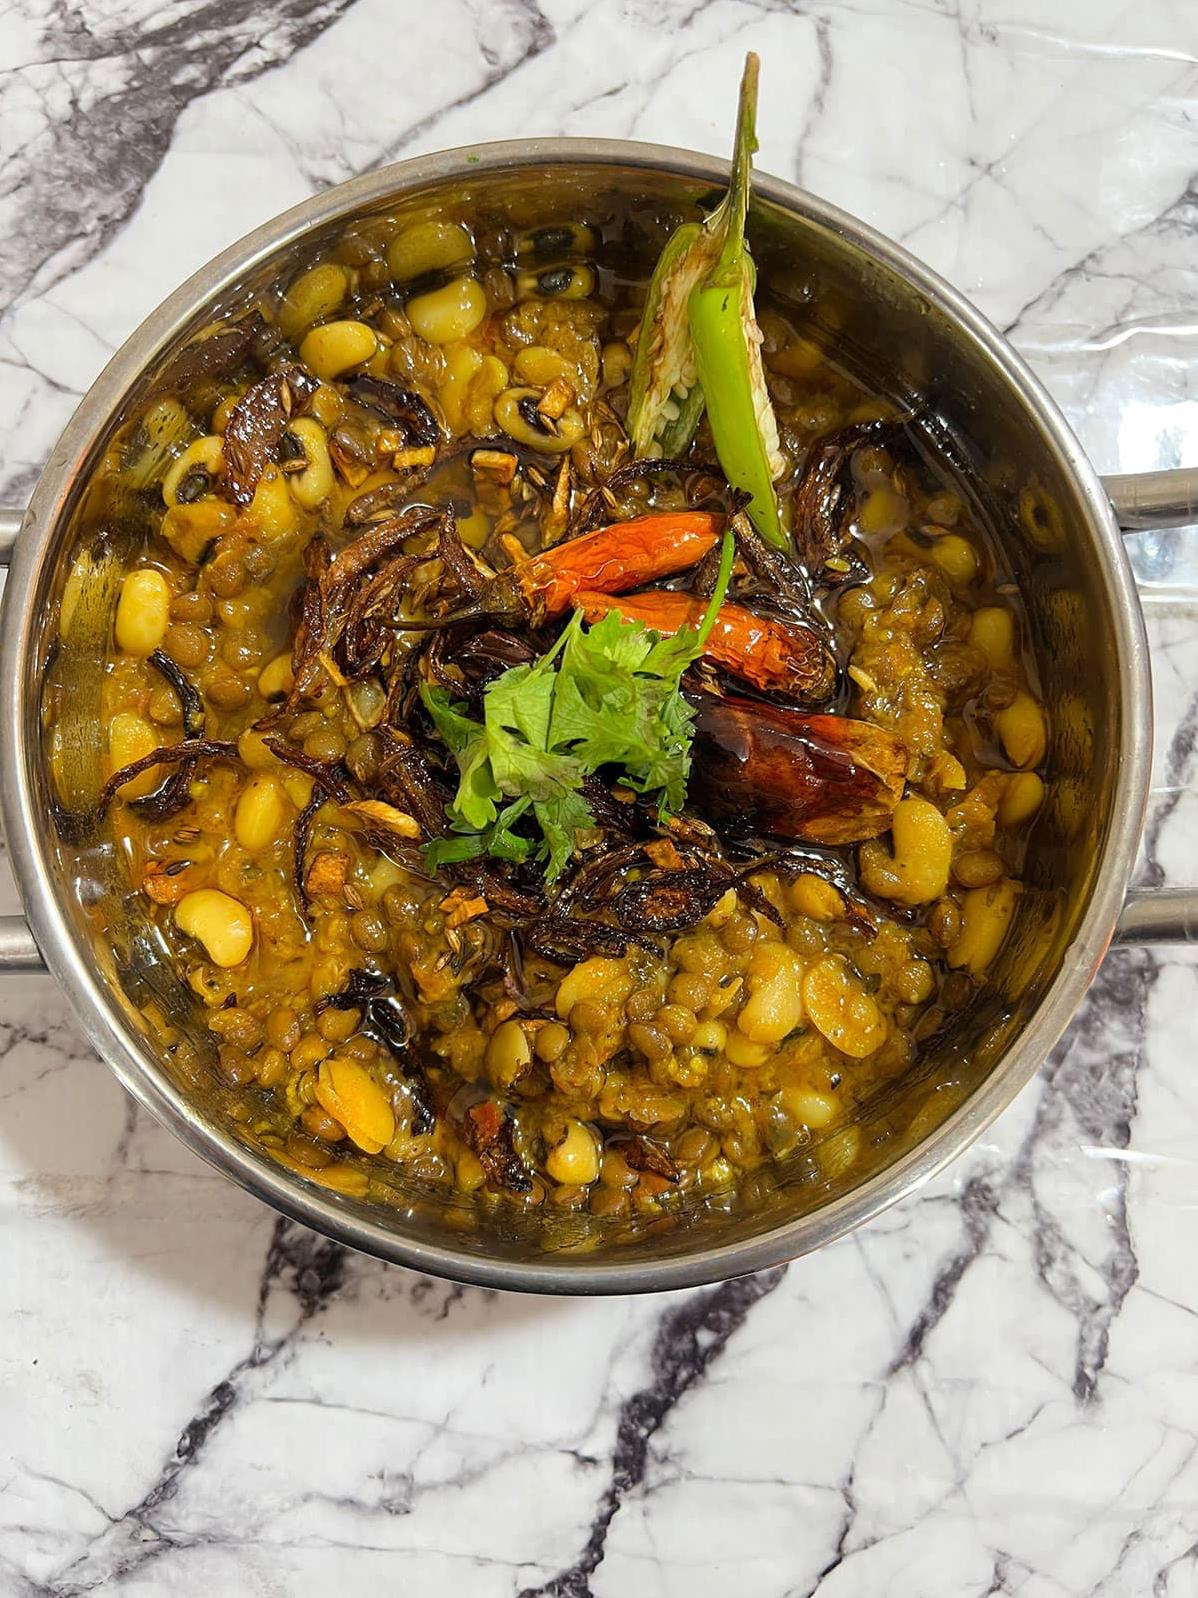  A mouth-watering bowl of Black Eyed Pea and Brown Lentil Pineapple Curry.